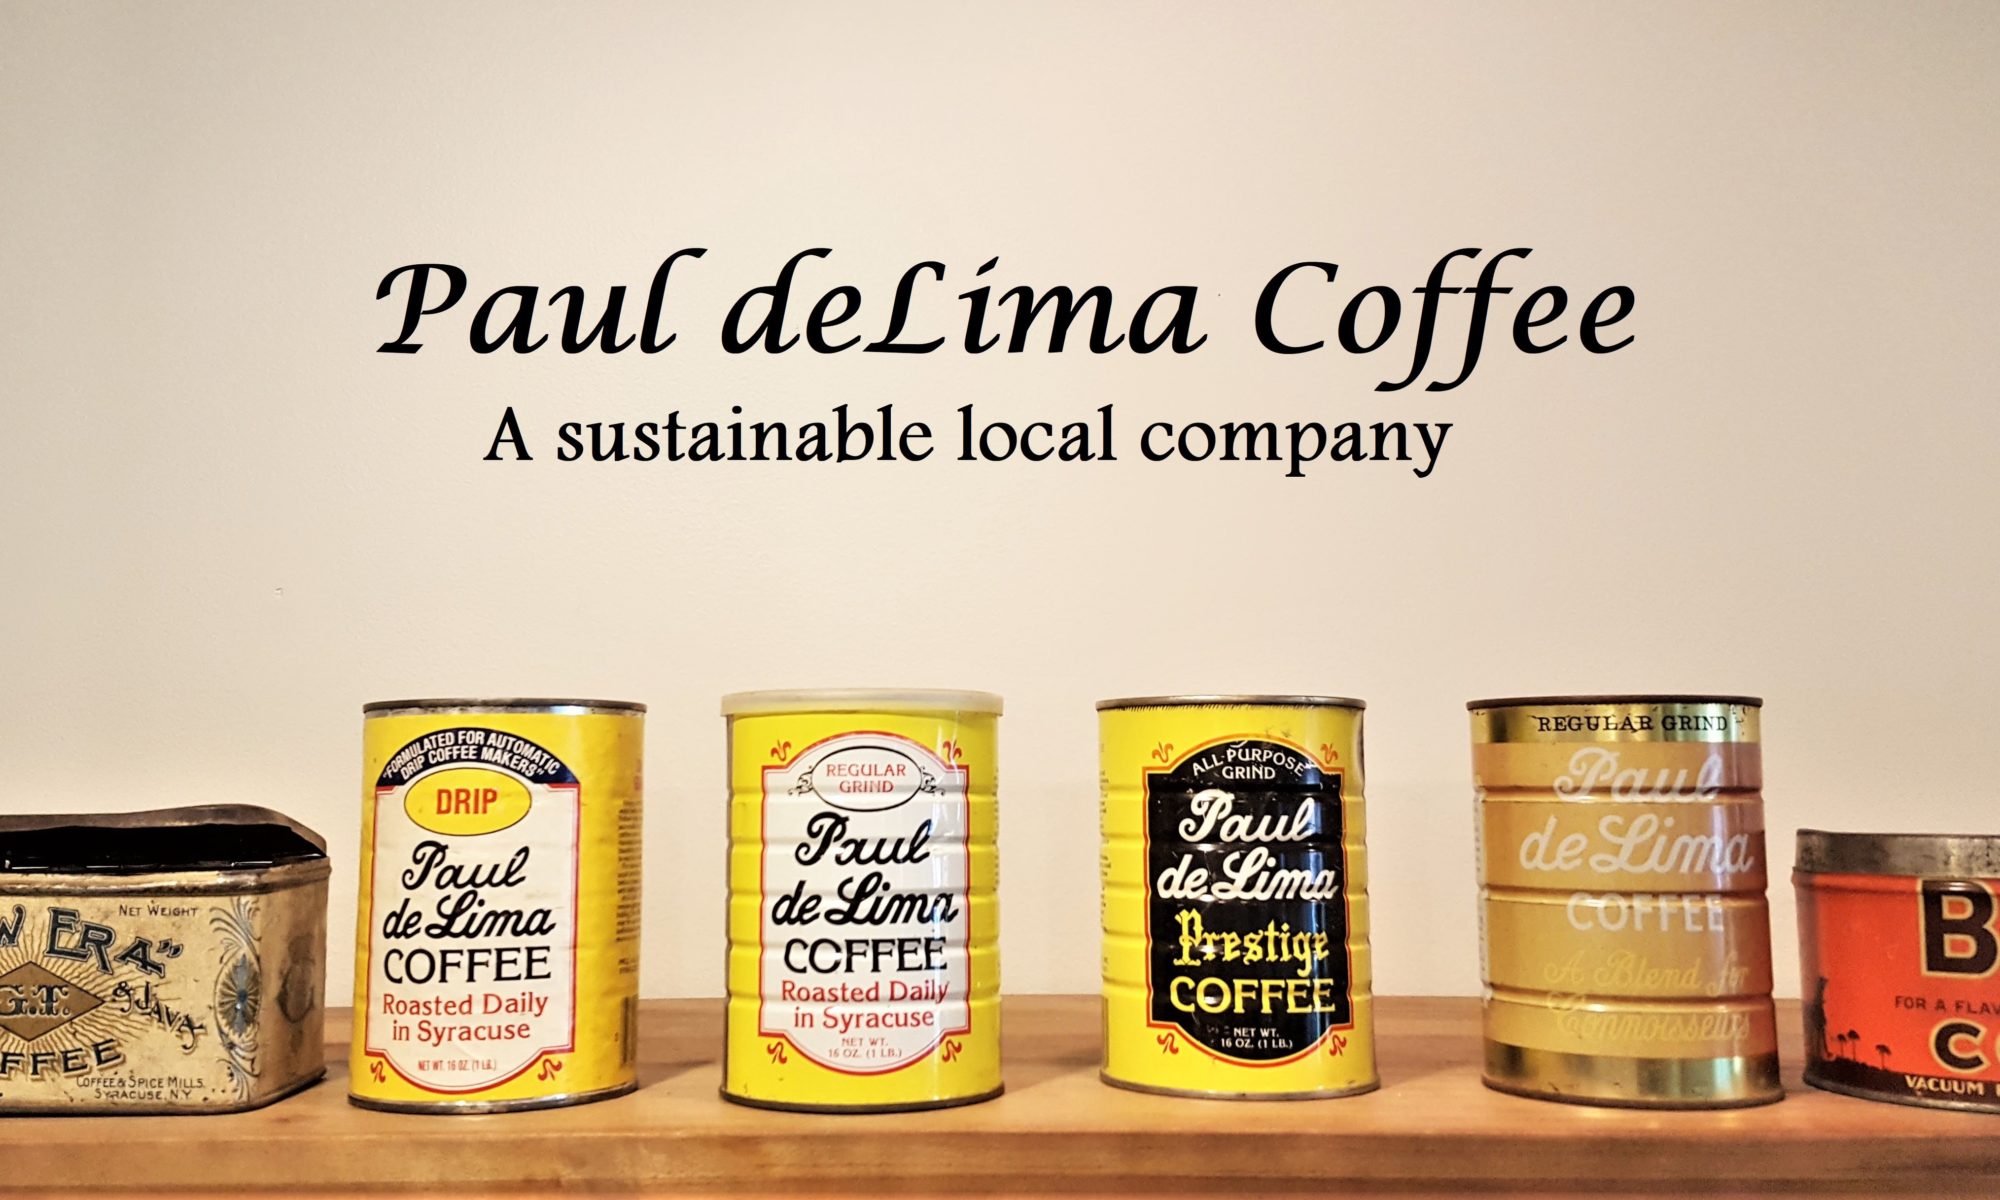 Title image for the photo essay about Paul deLima Coffee.